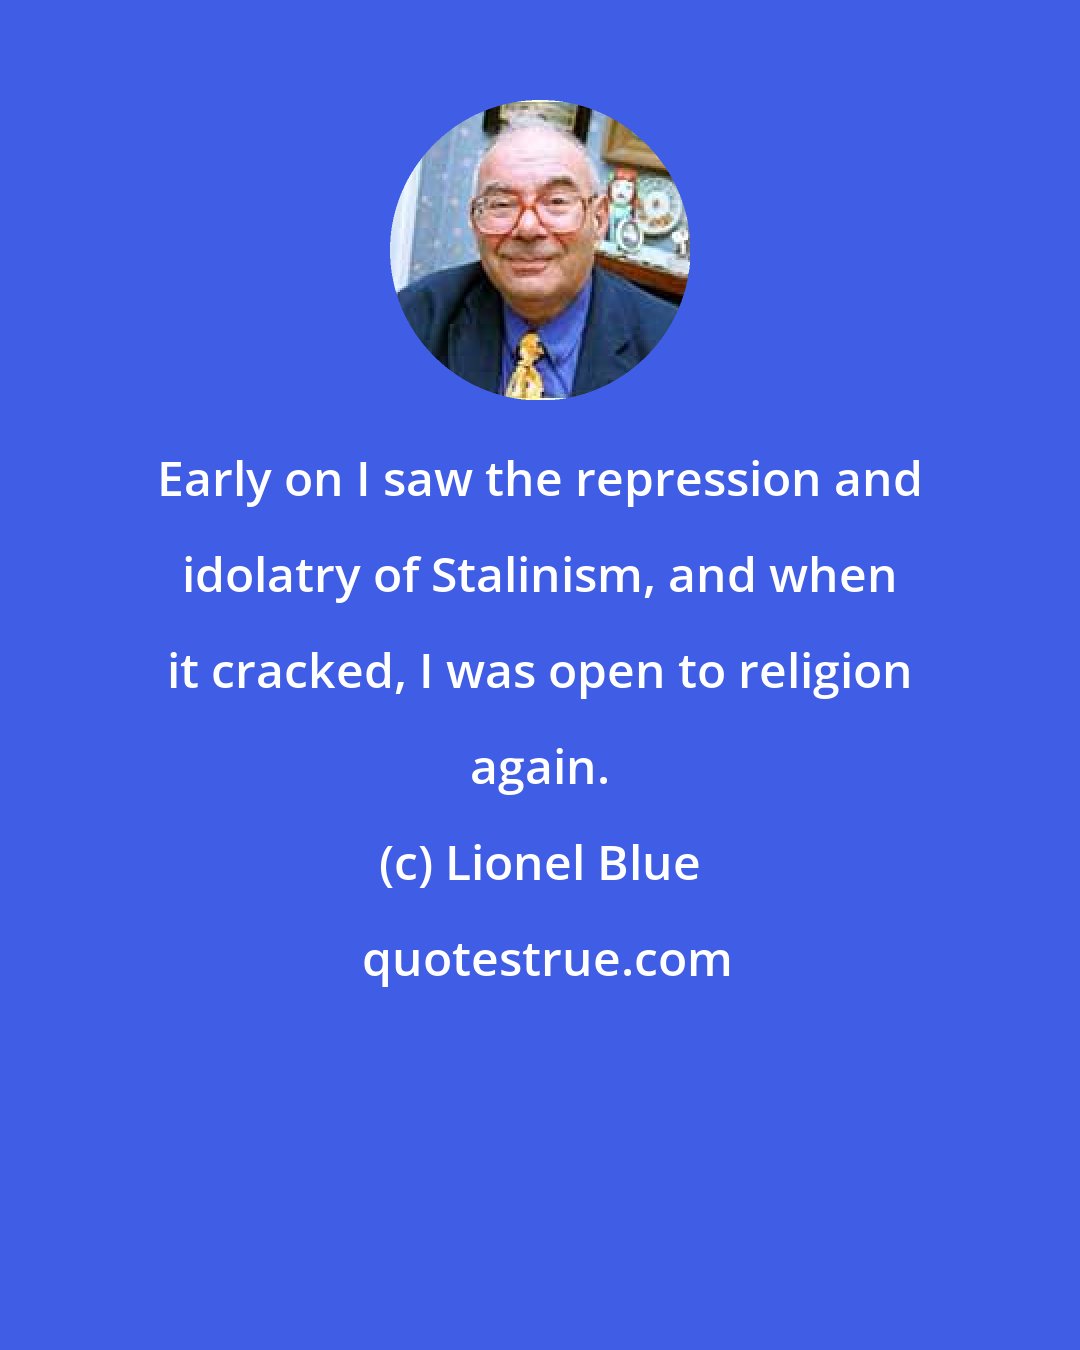 Lionel Blue: Early on I saw the repression and idolatry of Stalinism, and when it cracked, I was open to religion again.